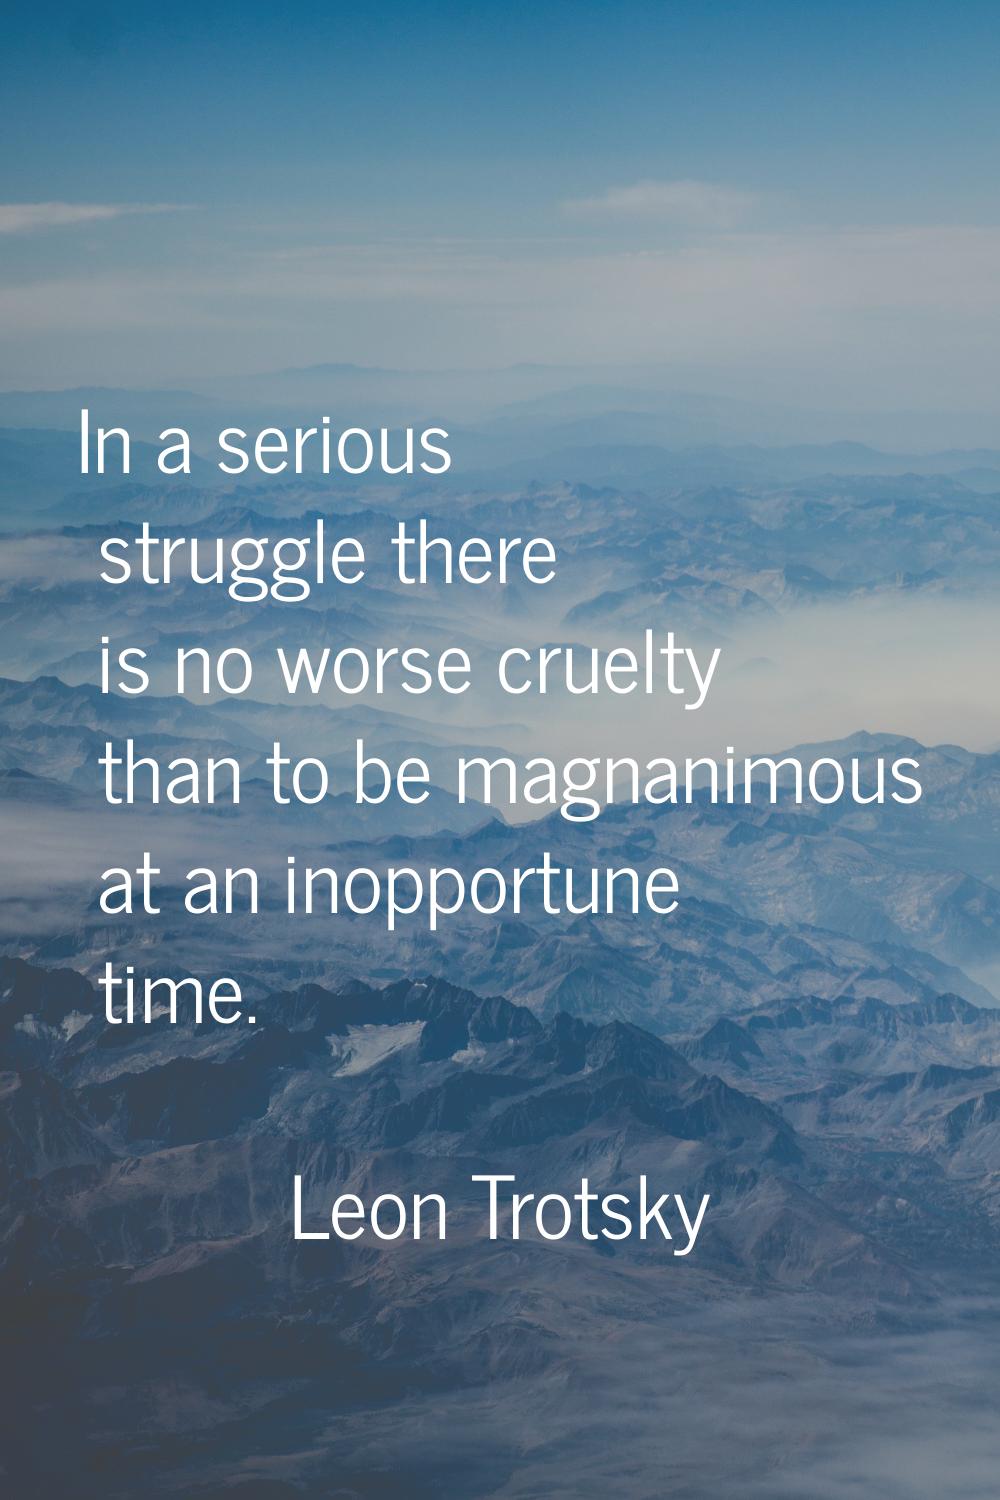 In a serious struggle there is no worse cruelty than to be magnanimous at an inopportune time.